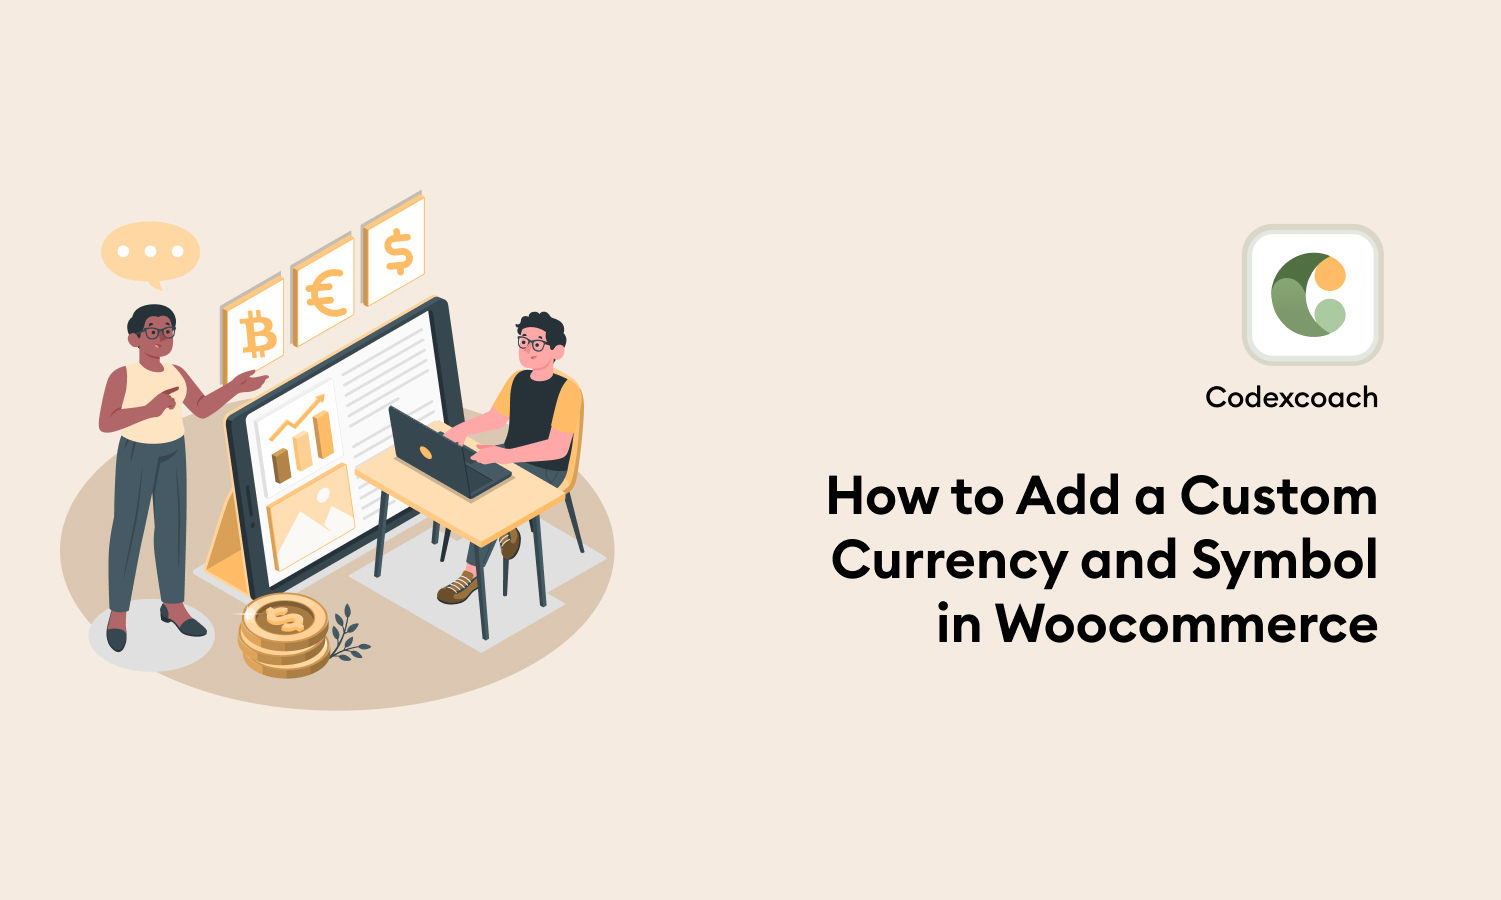 How to Add a Custom Currency and Symbol in Woocommerce